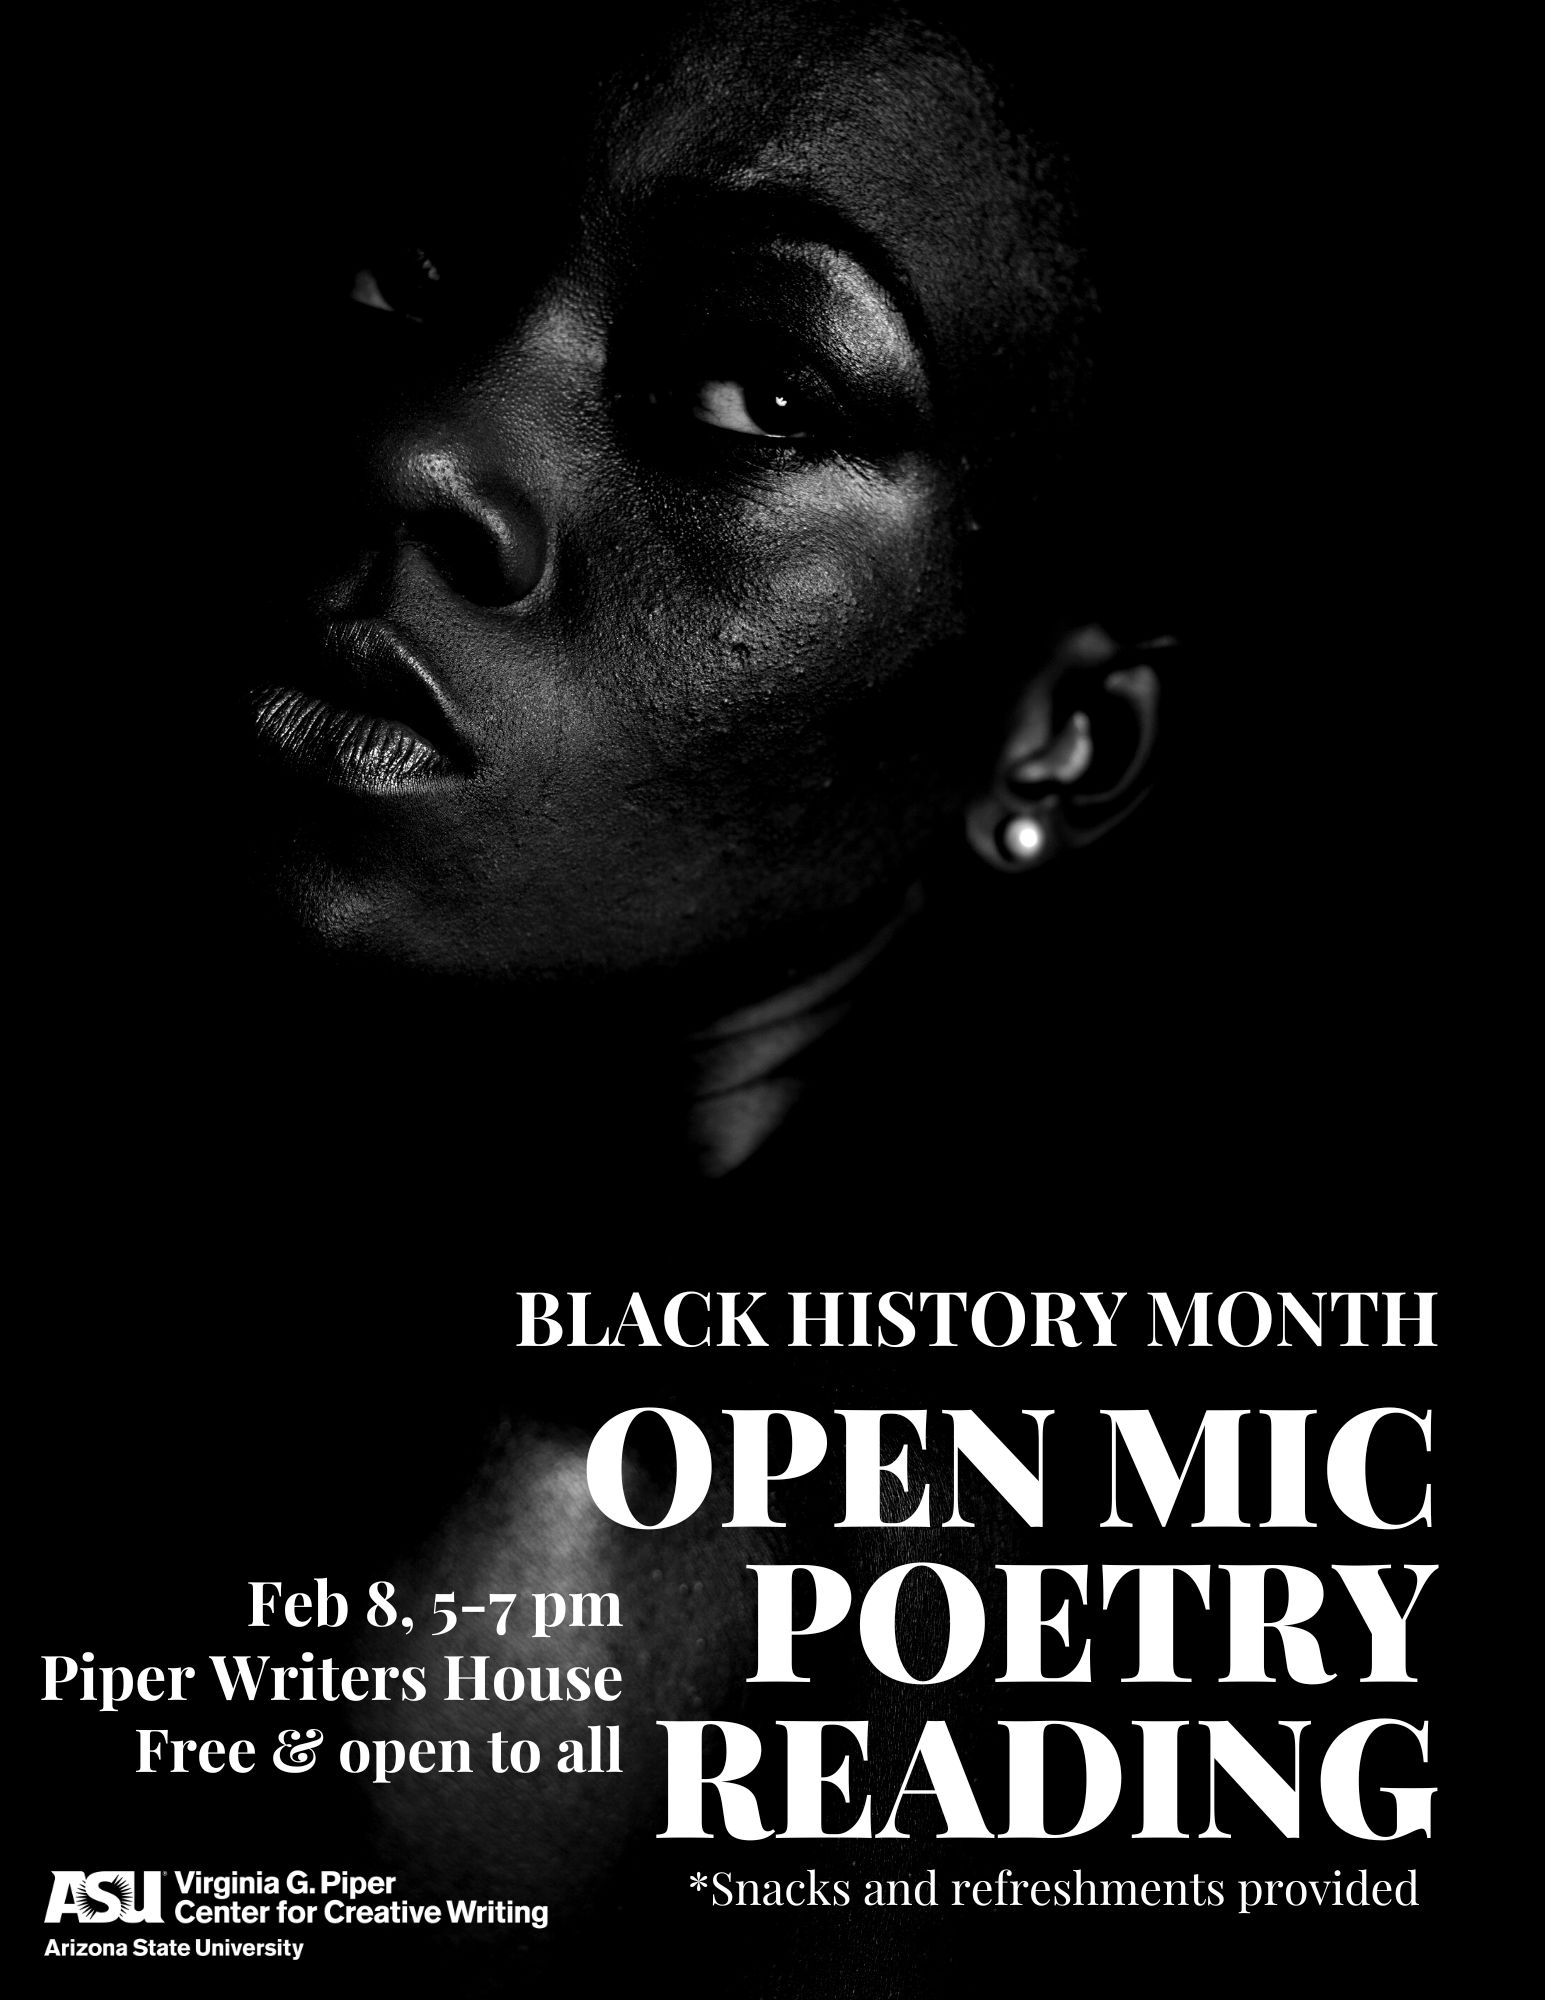 Black History Month Open Mic Poetry Reading